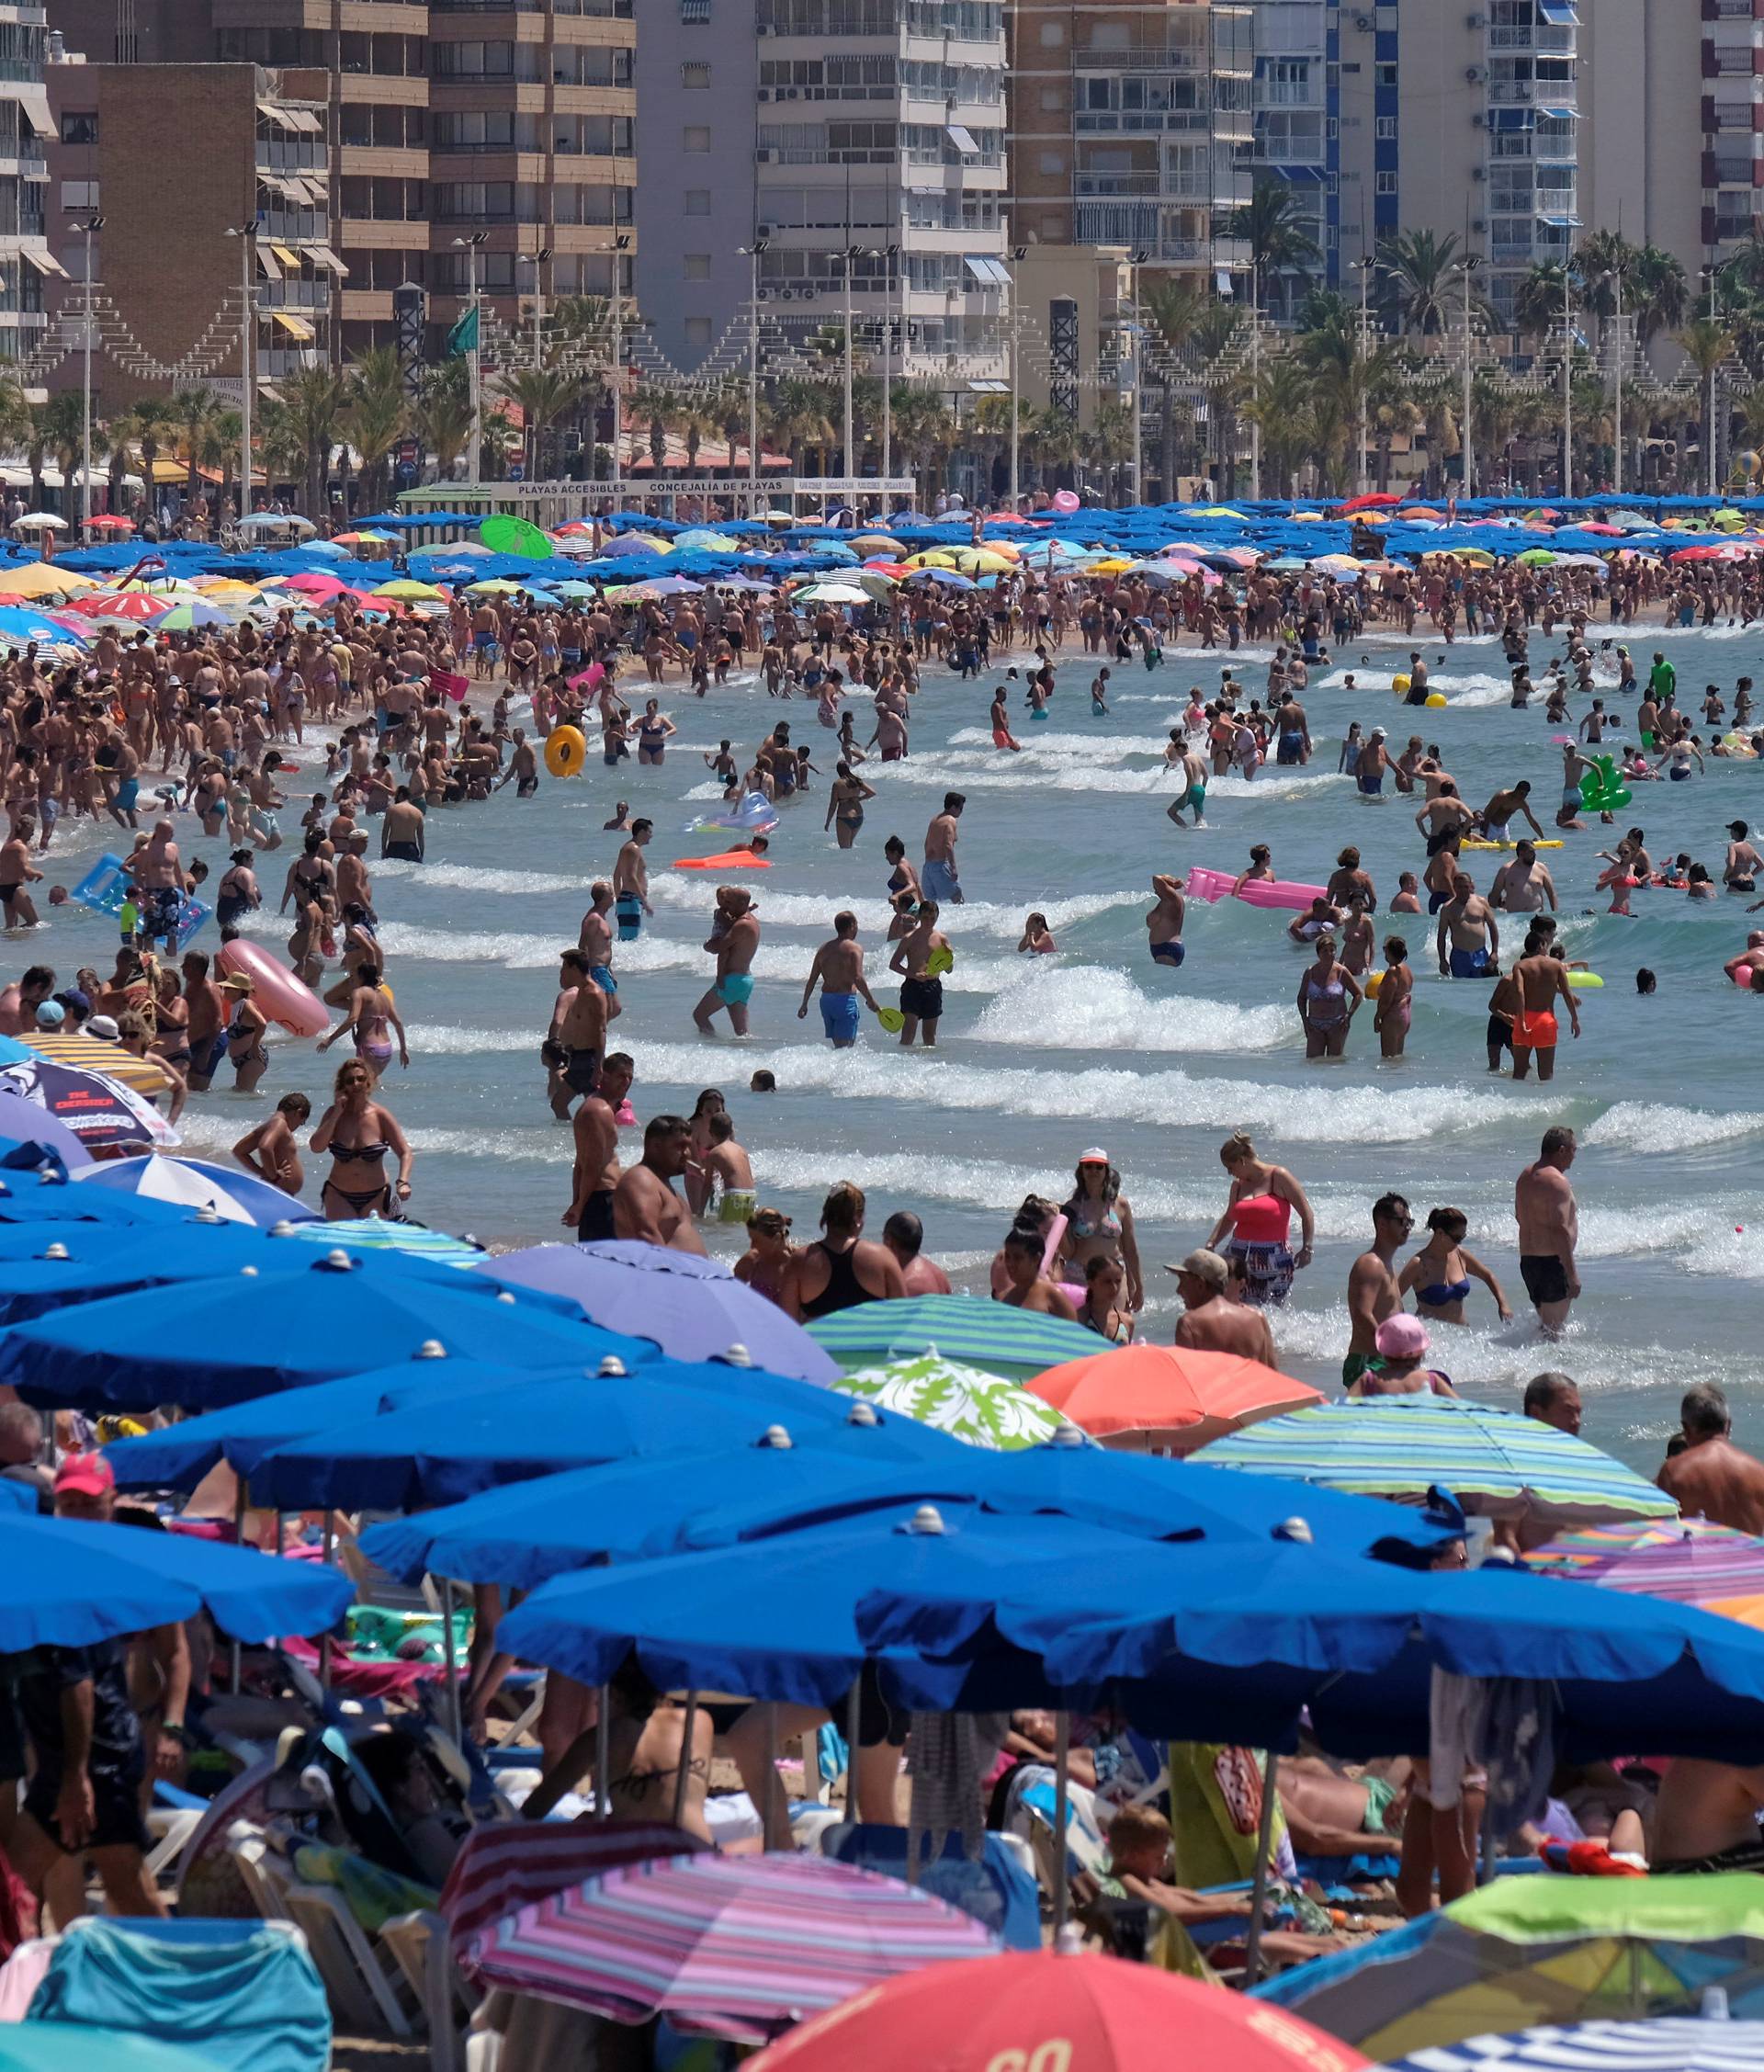 People cool off at the beach during the heatwave in the southeastern coastal town of Benidorm